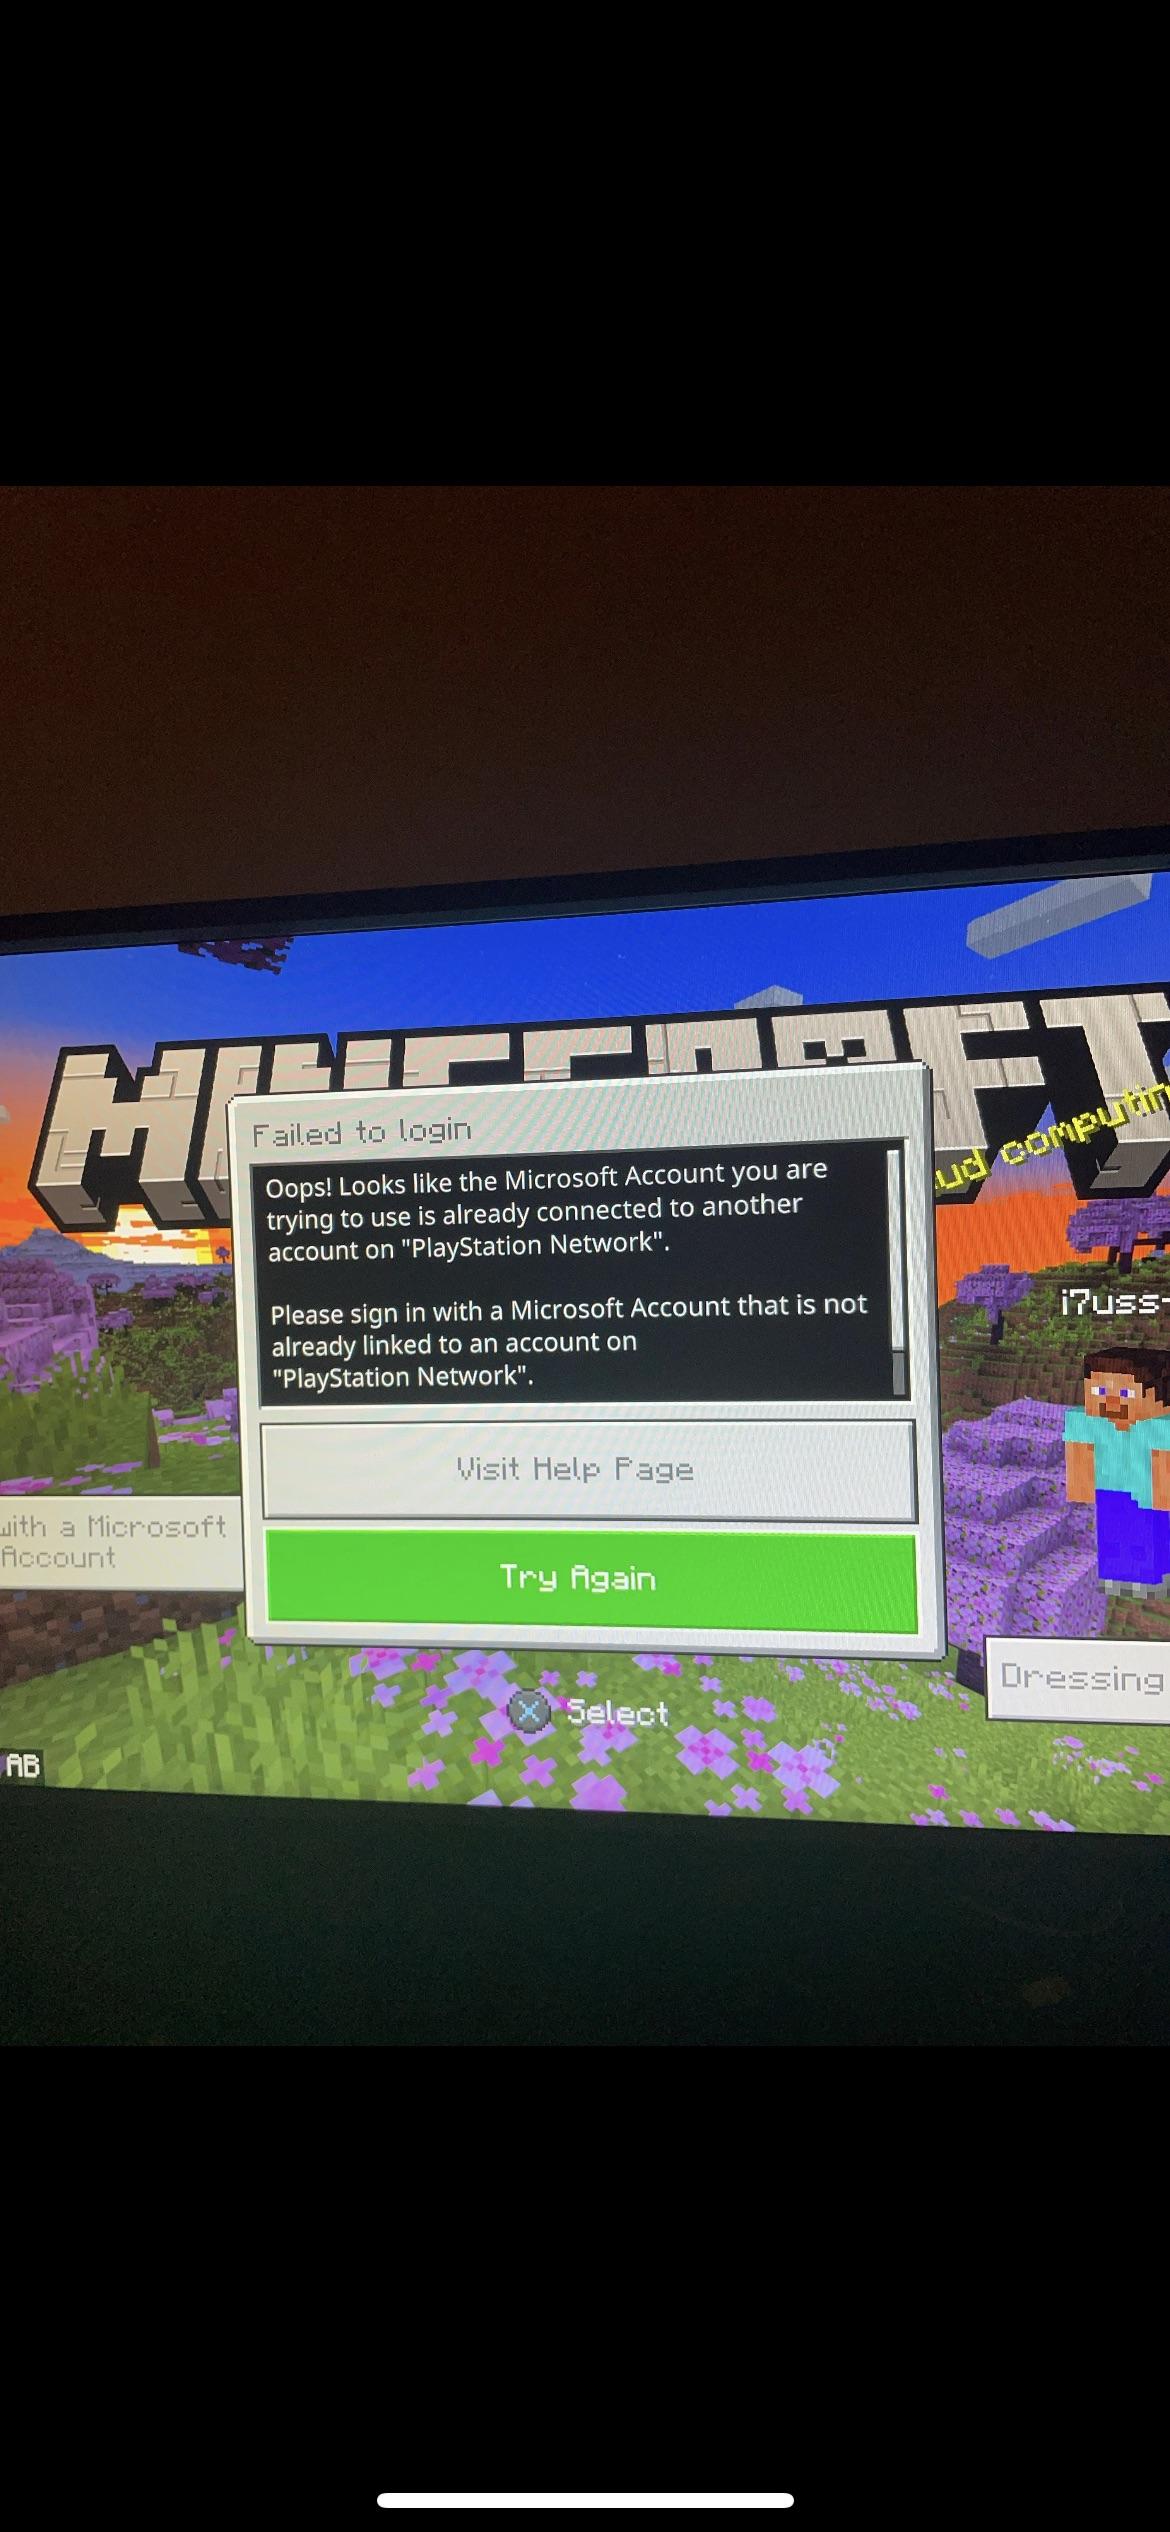 Minecraft Memes - I want to login my minecraft account but it’s linked in another playstation account and I don’t remember that account. What do I do now 🥲